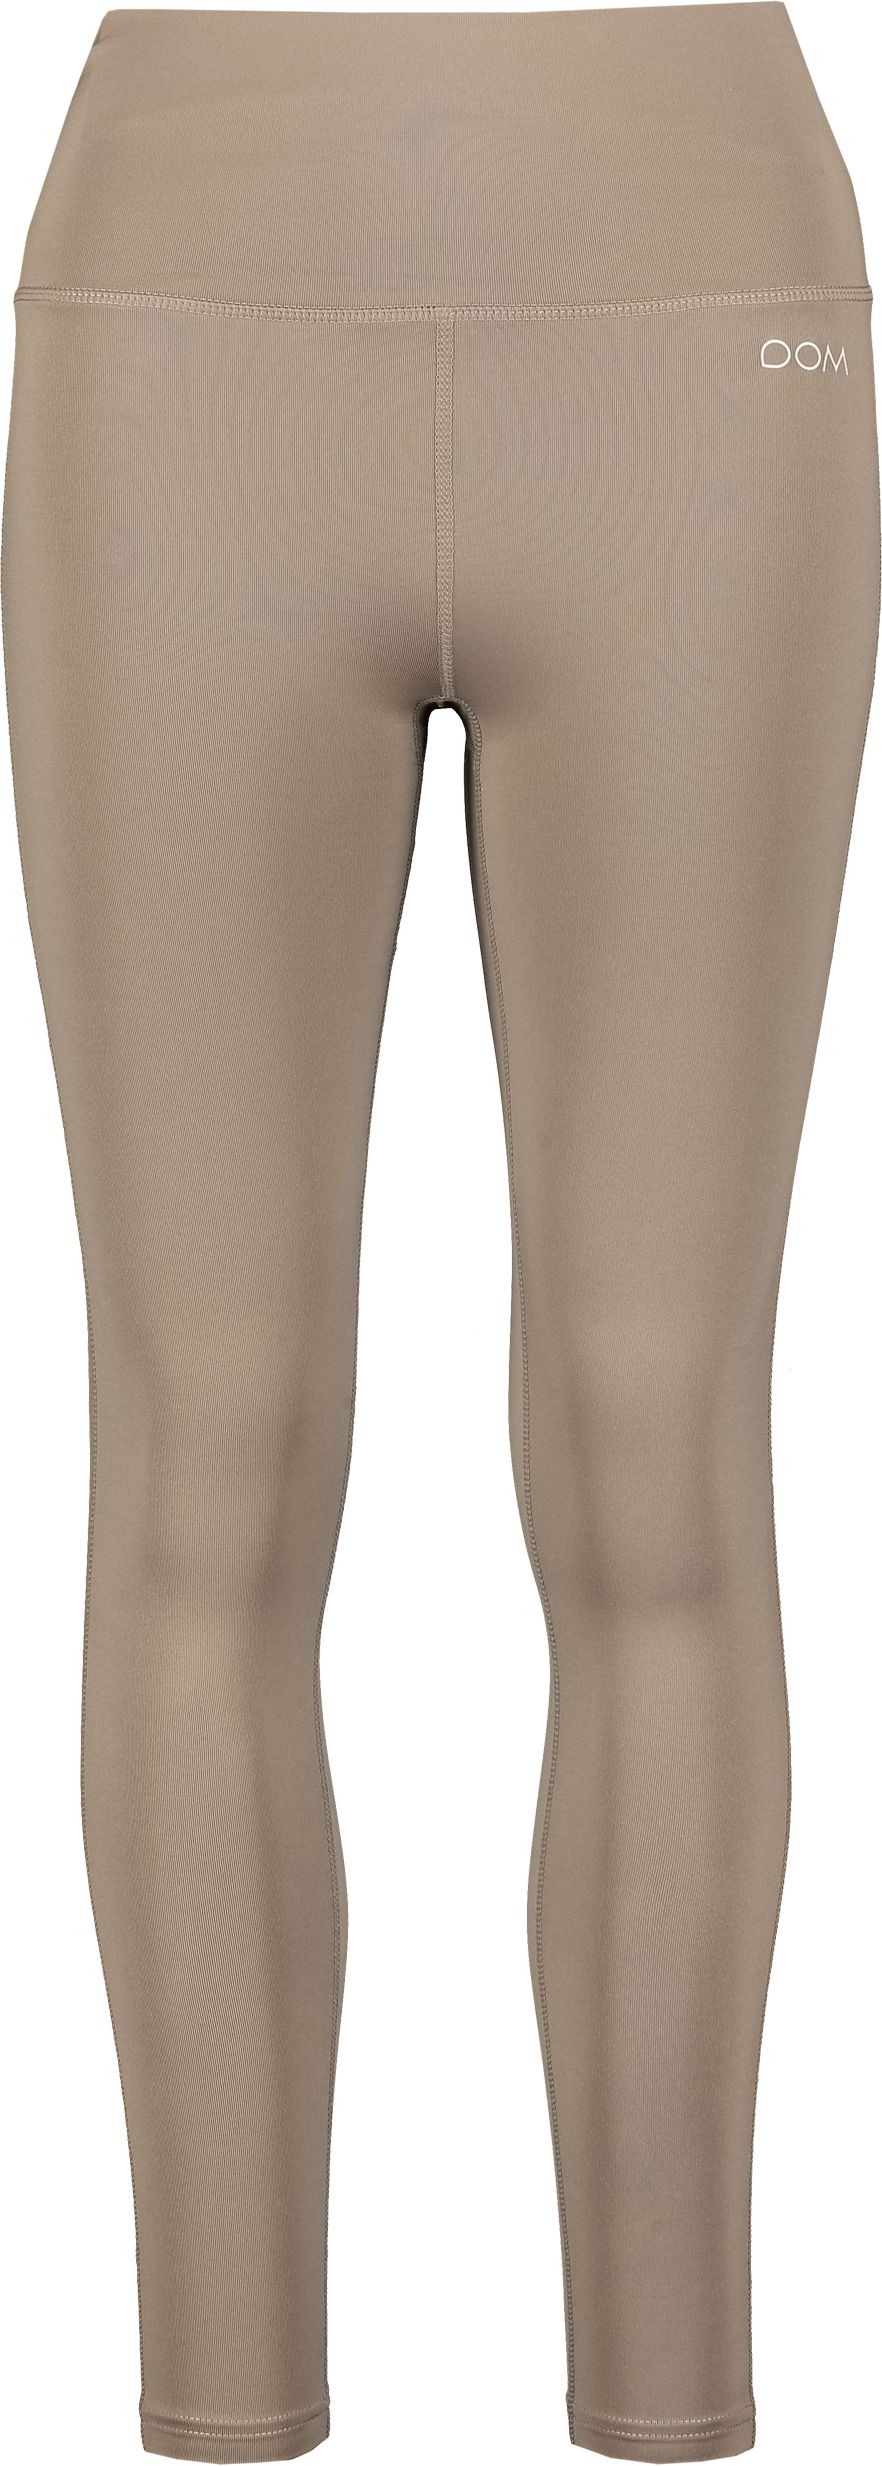 DROP OF MINDFULNESS, CLAIRE TIGHTS W